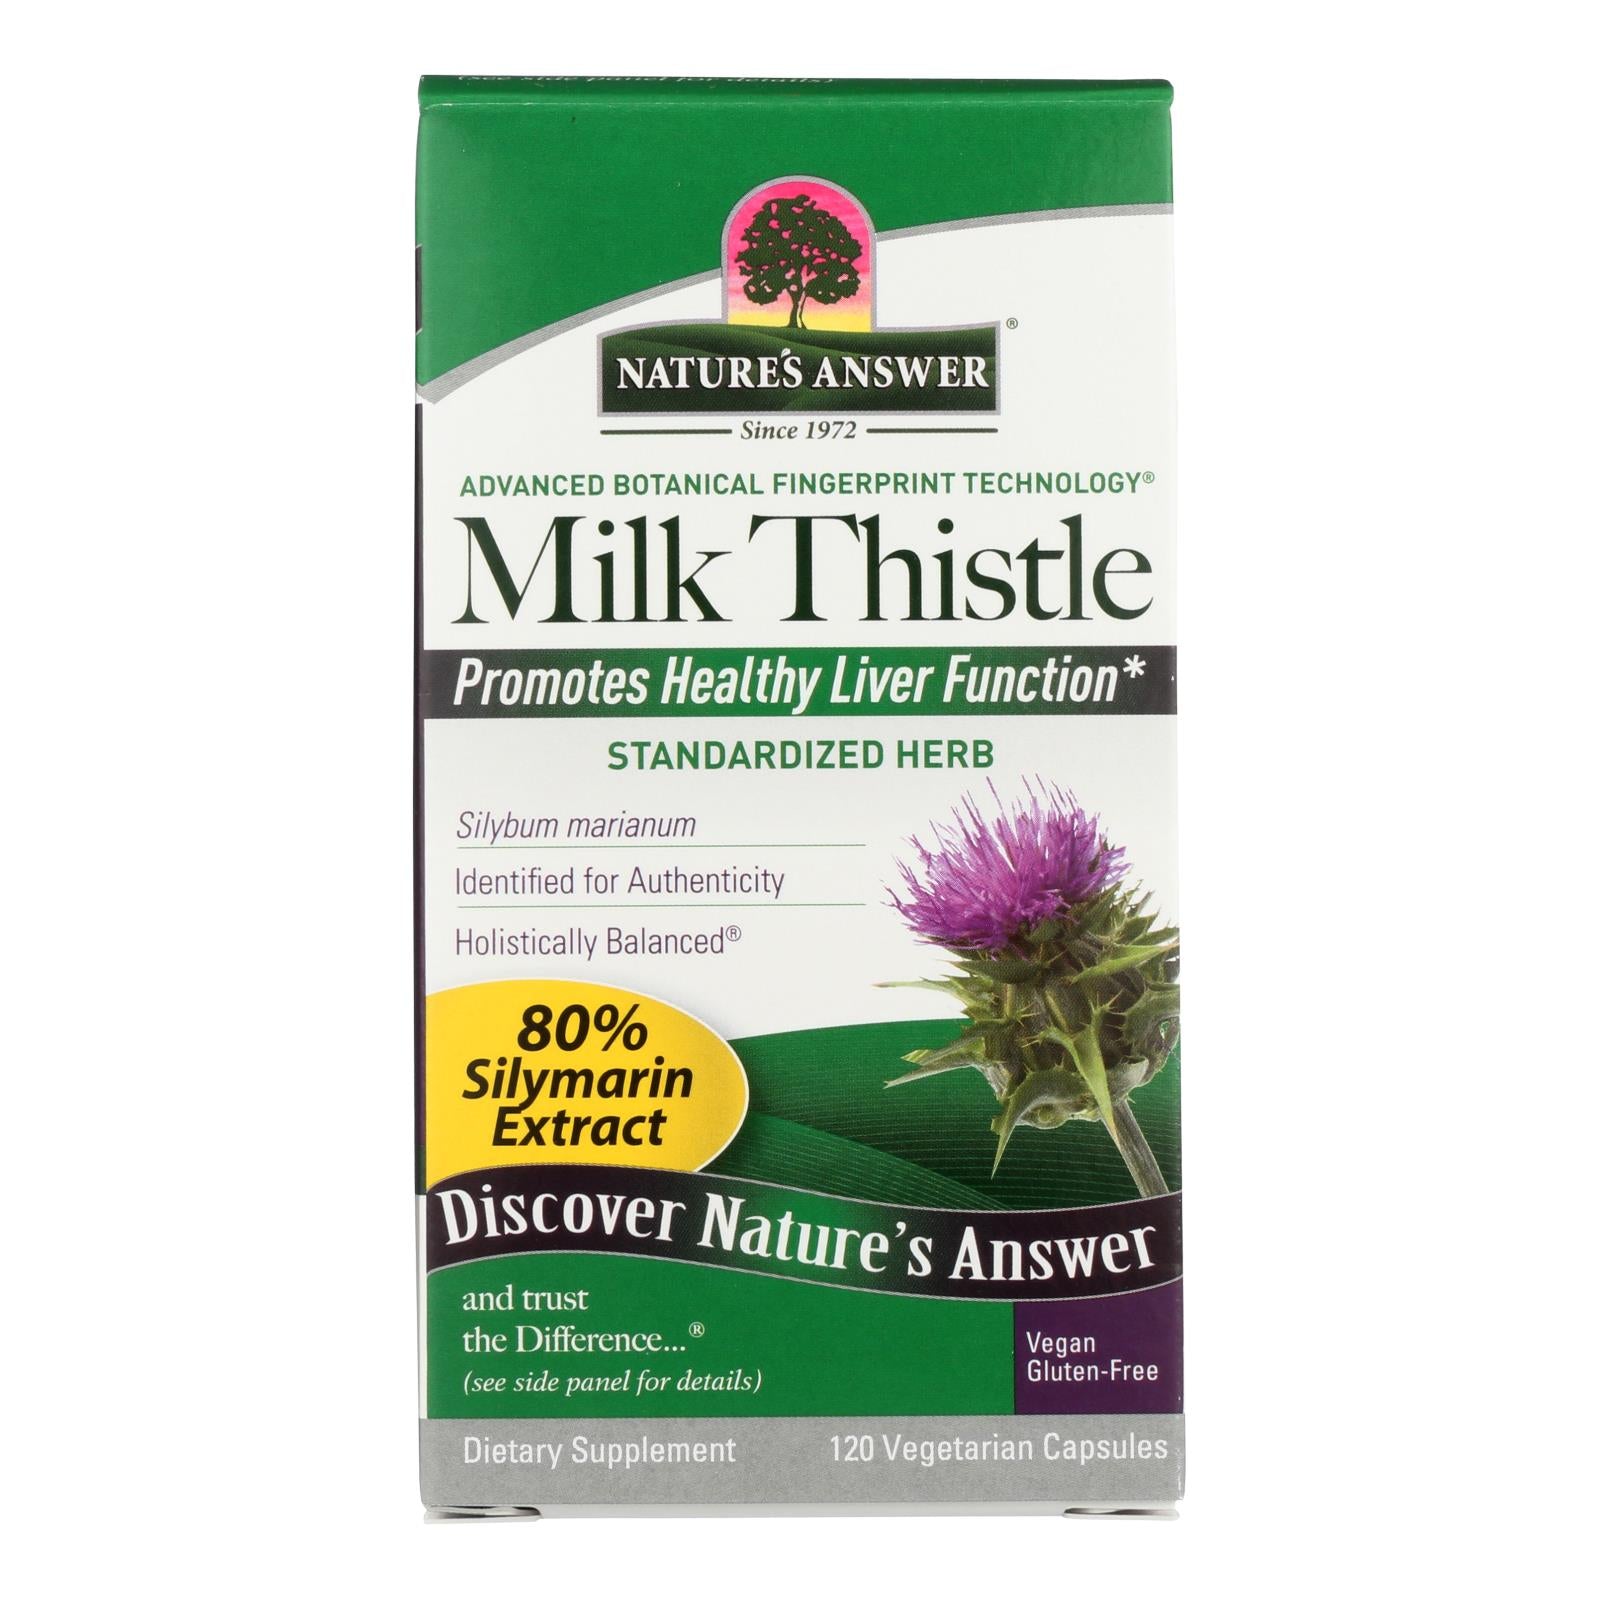 Nature's Answer Milk Thistle Seed Extract